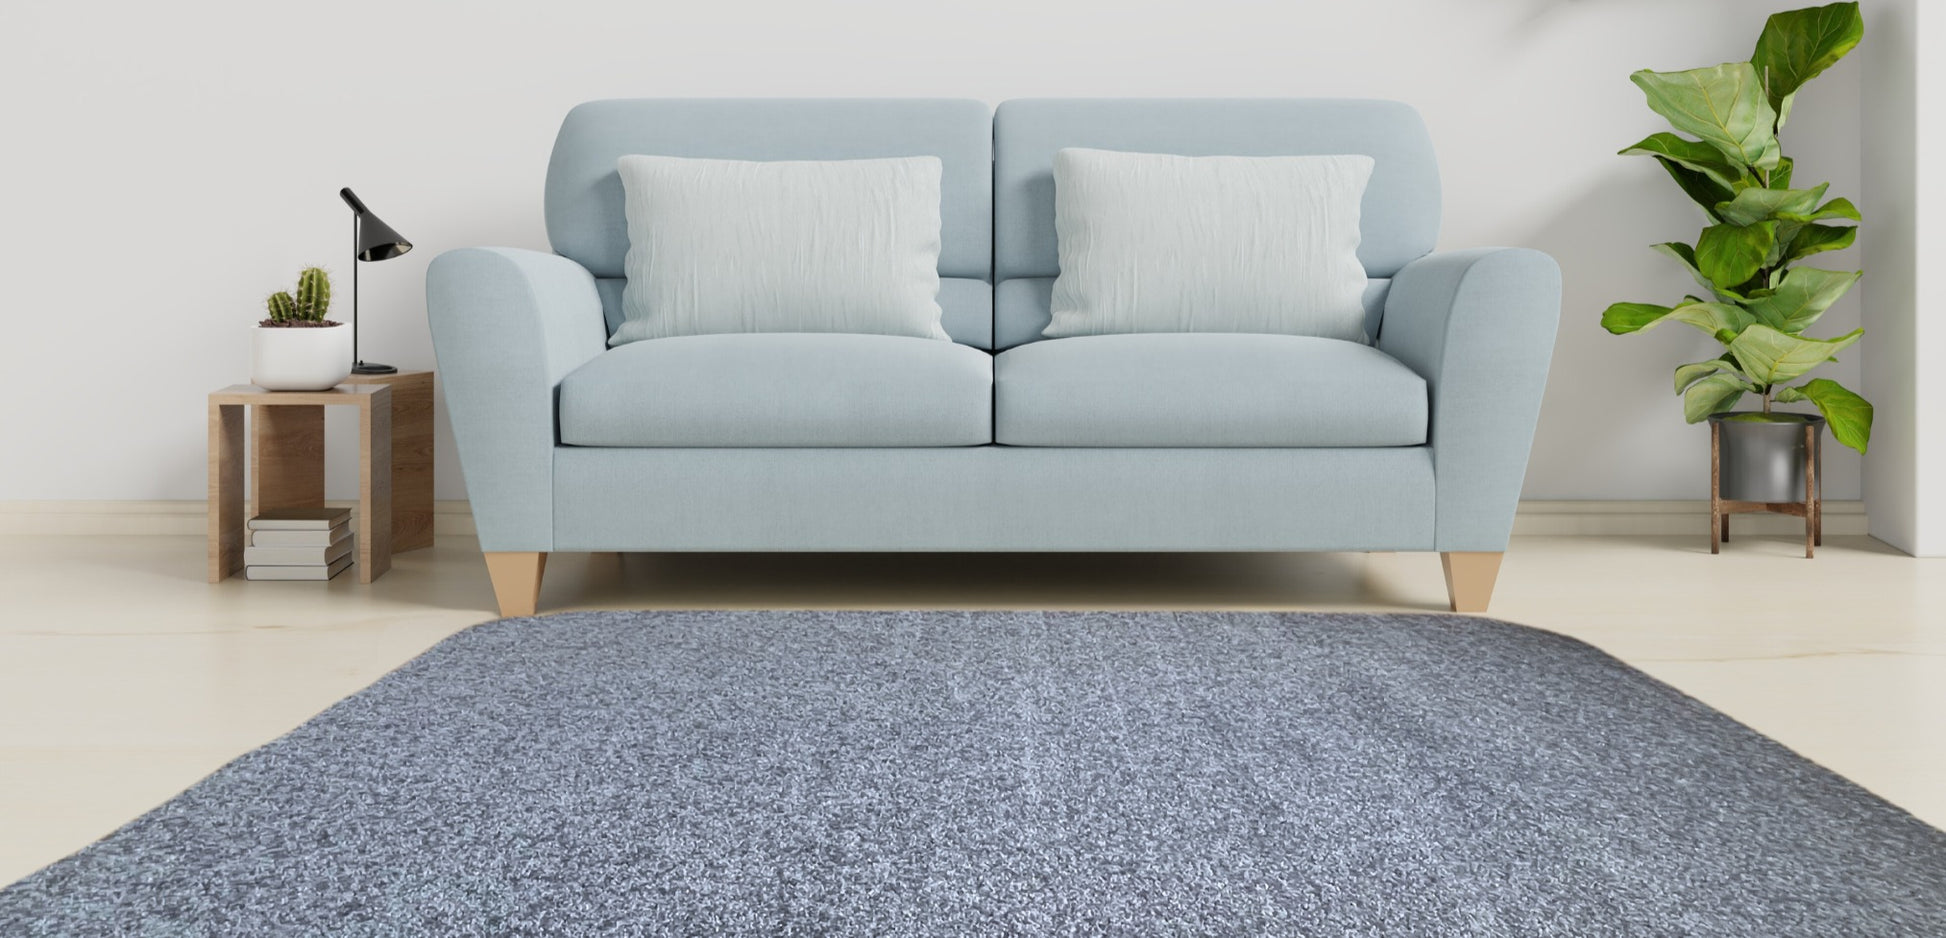 Country Denim Blue Area Rug in living room